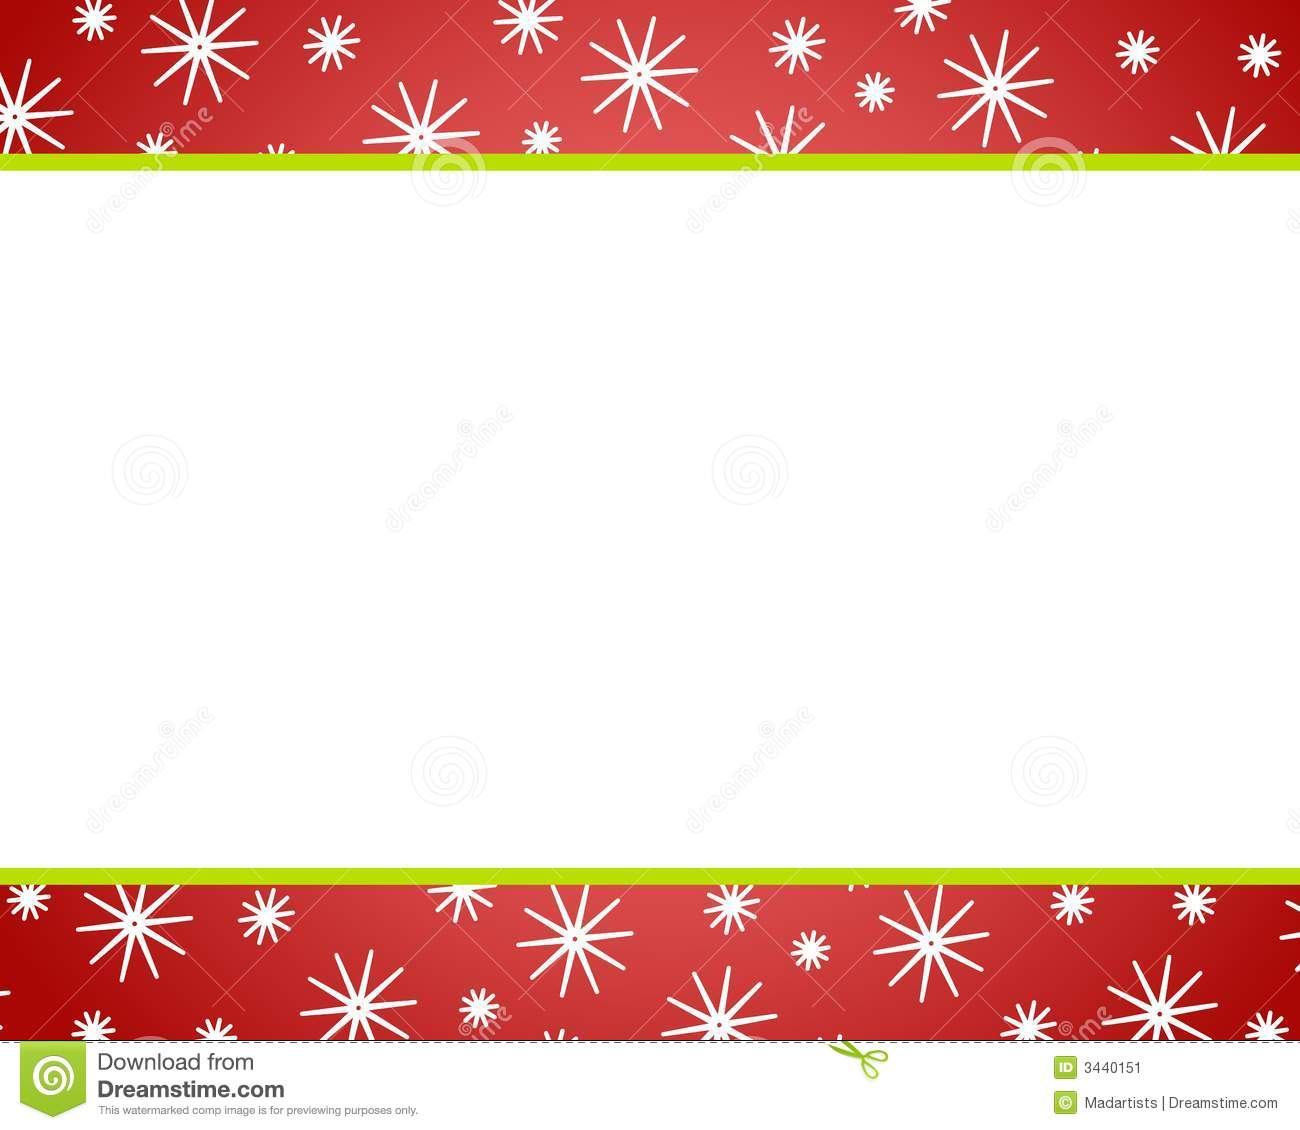 Free December Borders Cliparts, Download Free Clip Art, Free.